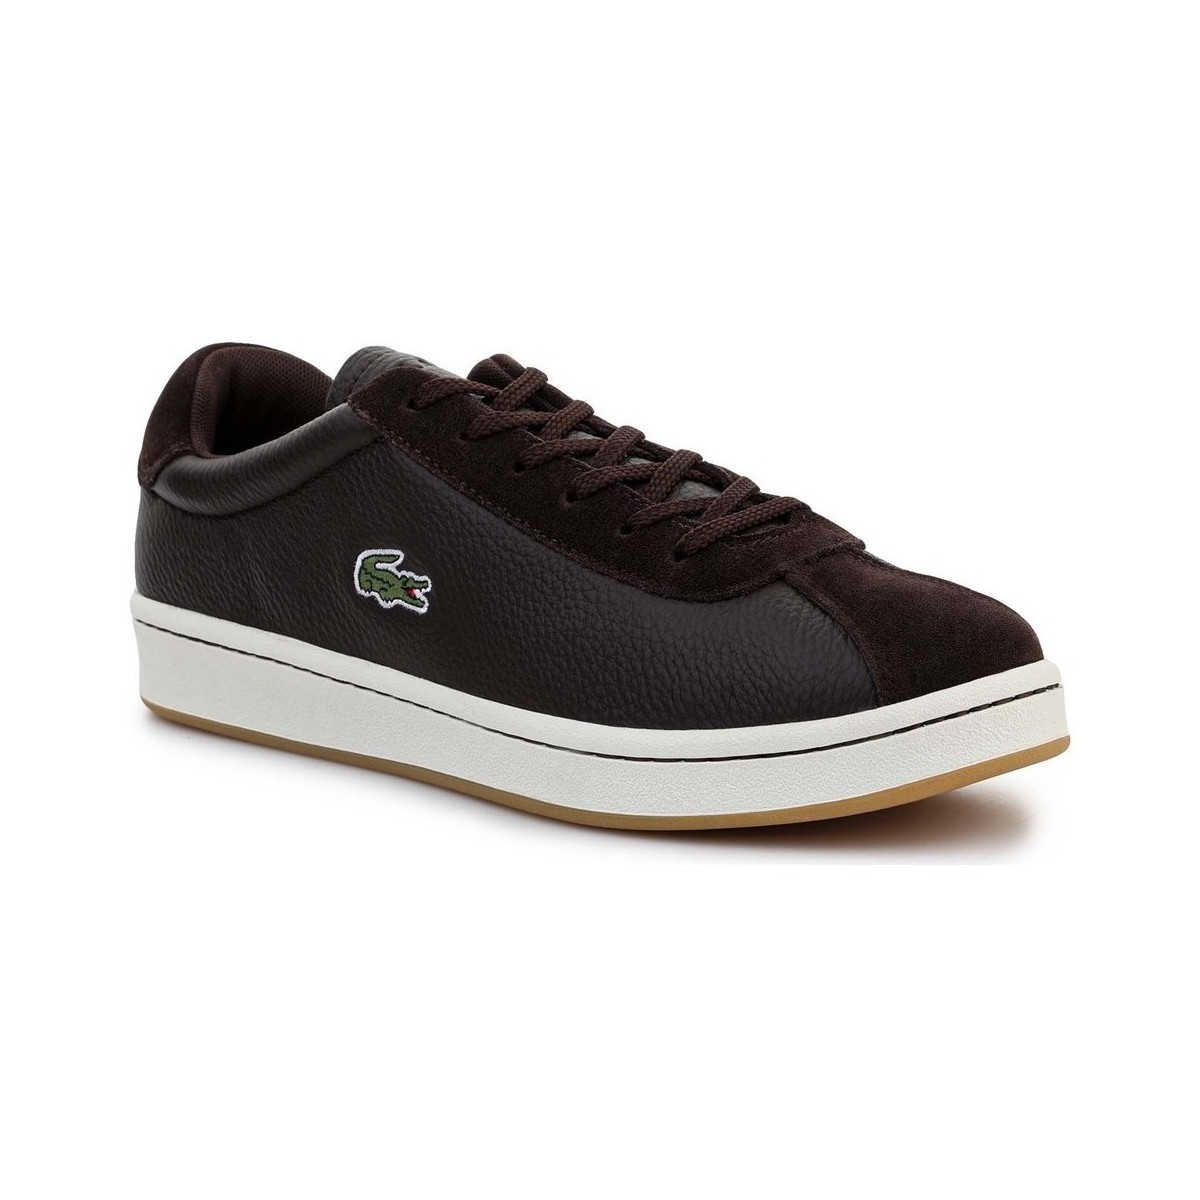 lacoste  masters 119 3 sma  men's shoes (trainers) in black